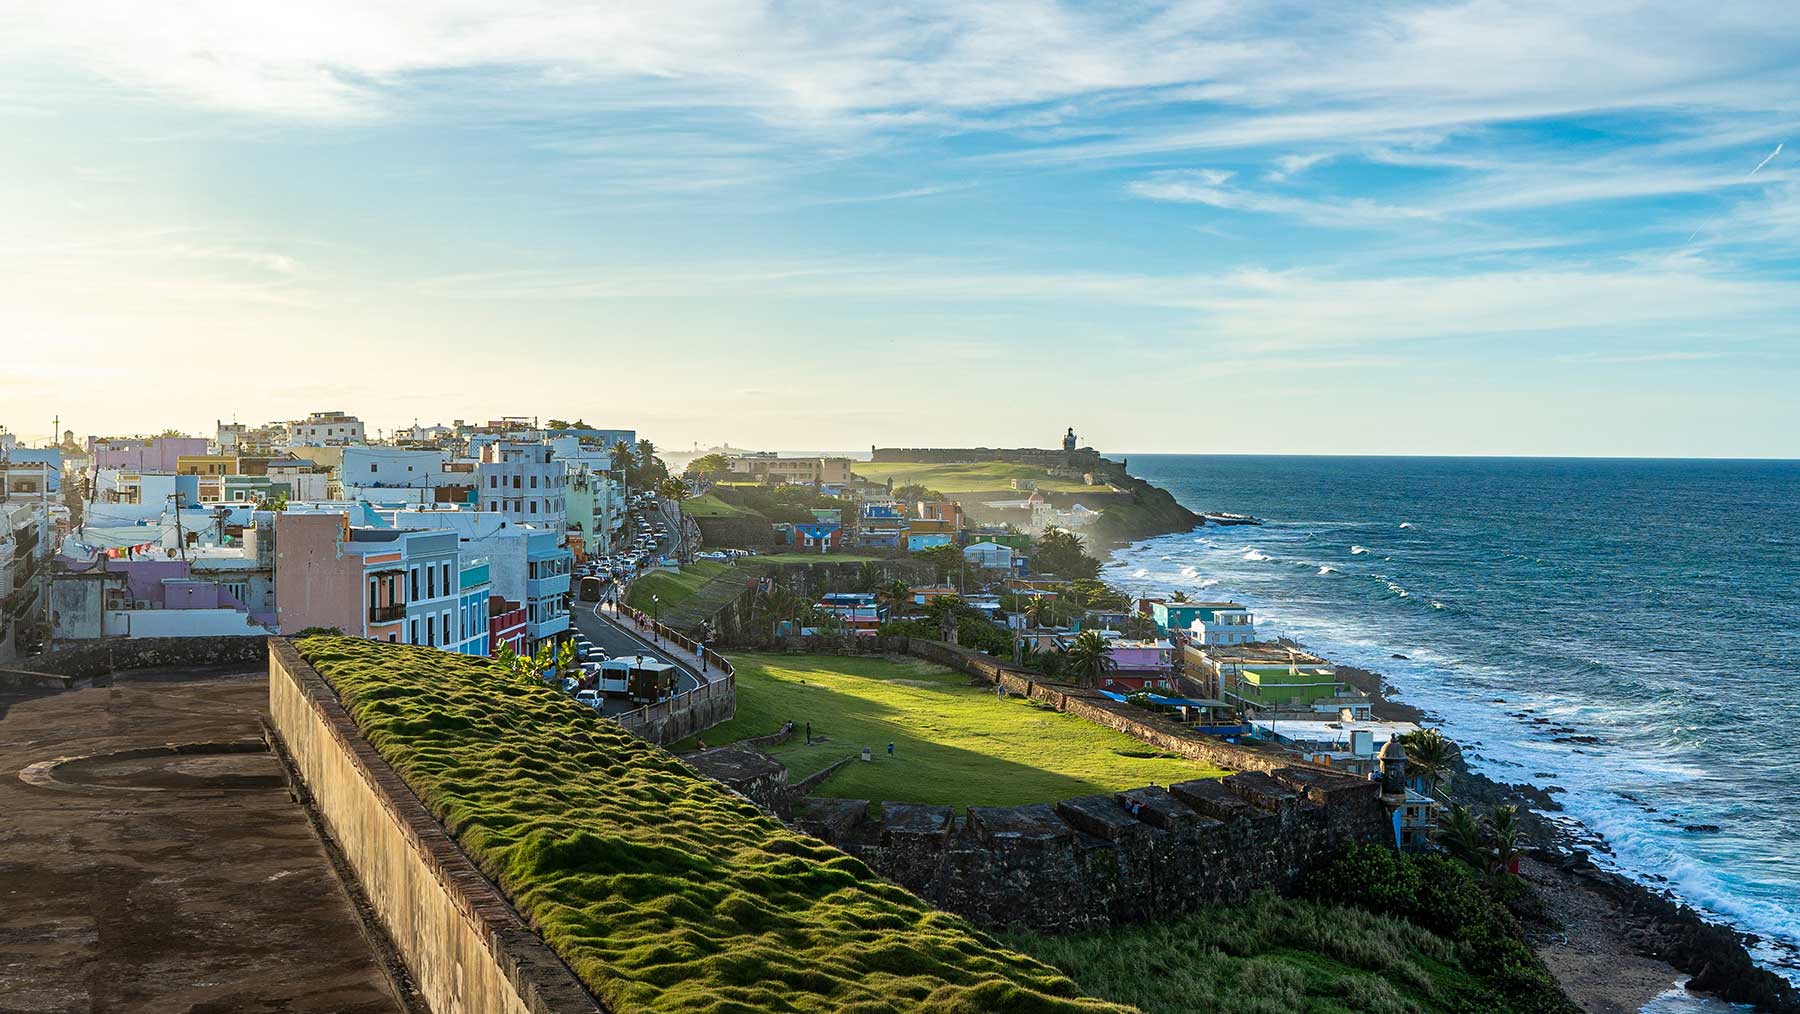 A view of Old San Juan in Puerto Rico with colorful buildings overlooking the water